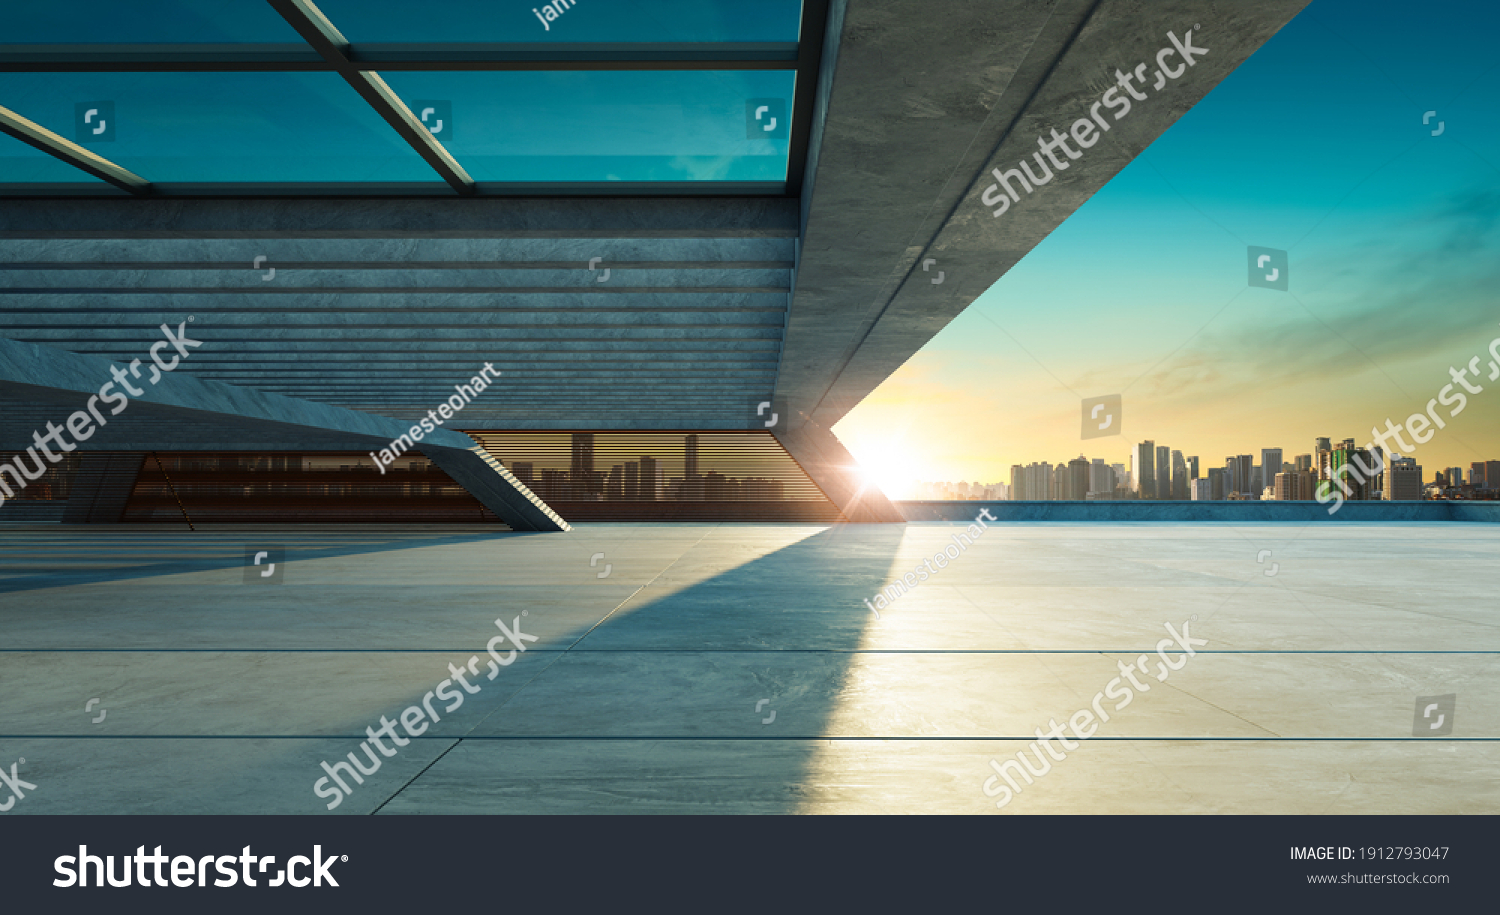 Perspective view of empty concrete floor and modern rooftop building with sunset cityscape scene. Mixed media #1912793047